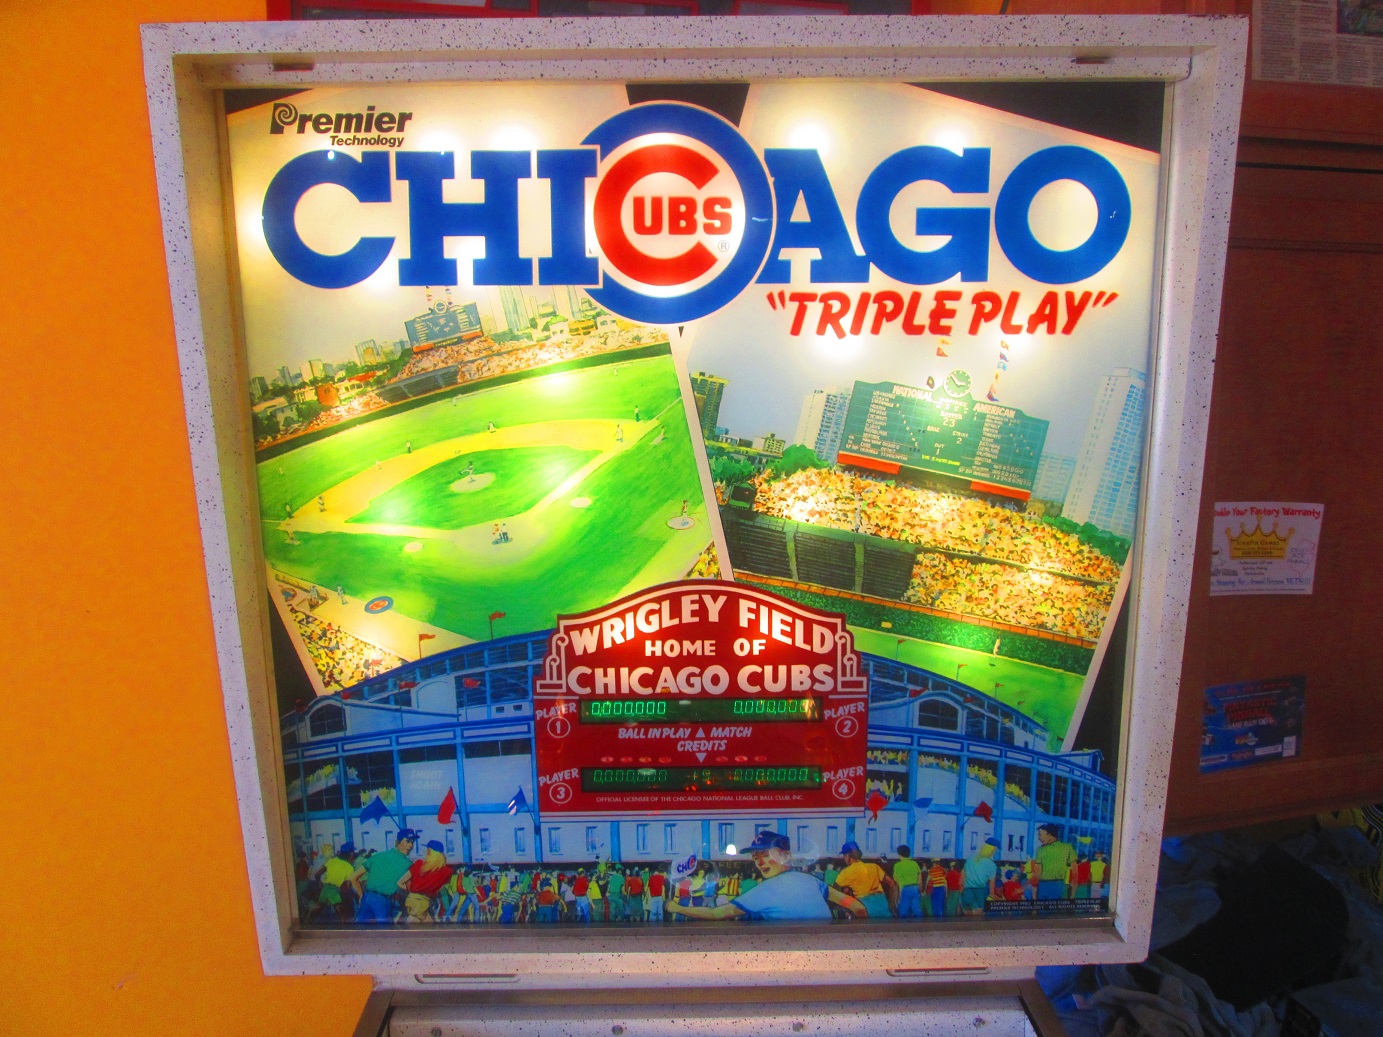 This game came out one year after the Cubs won the pennant, the first time they'd won anything in four decades.